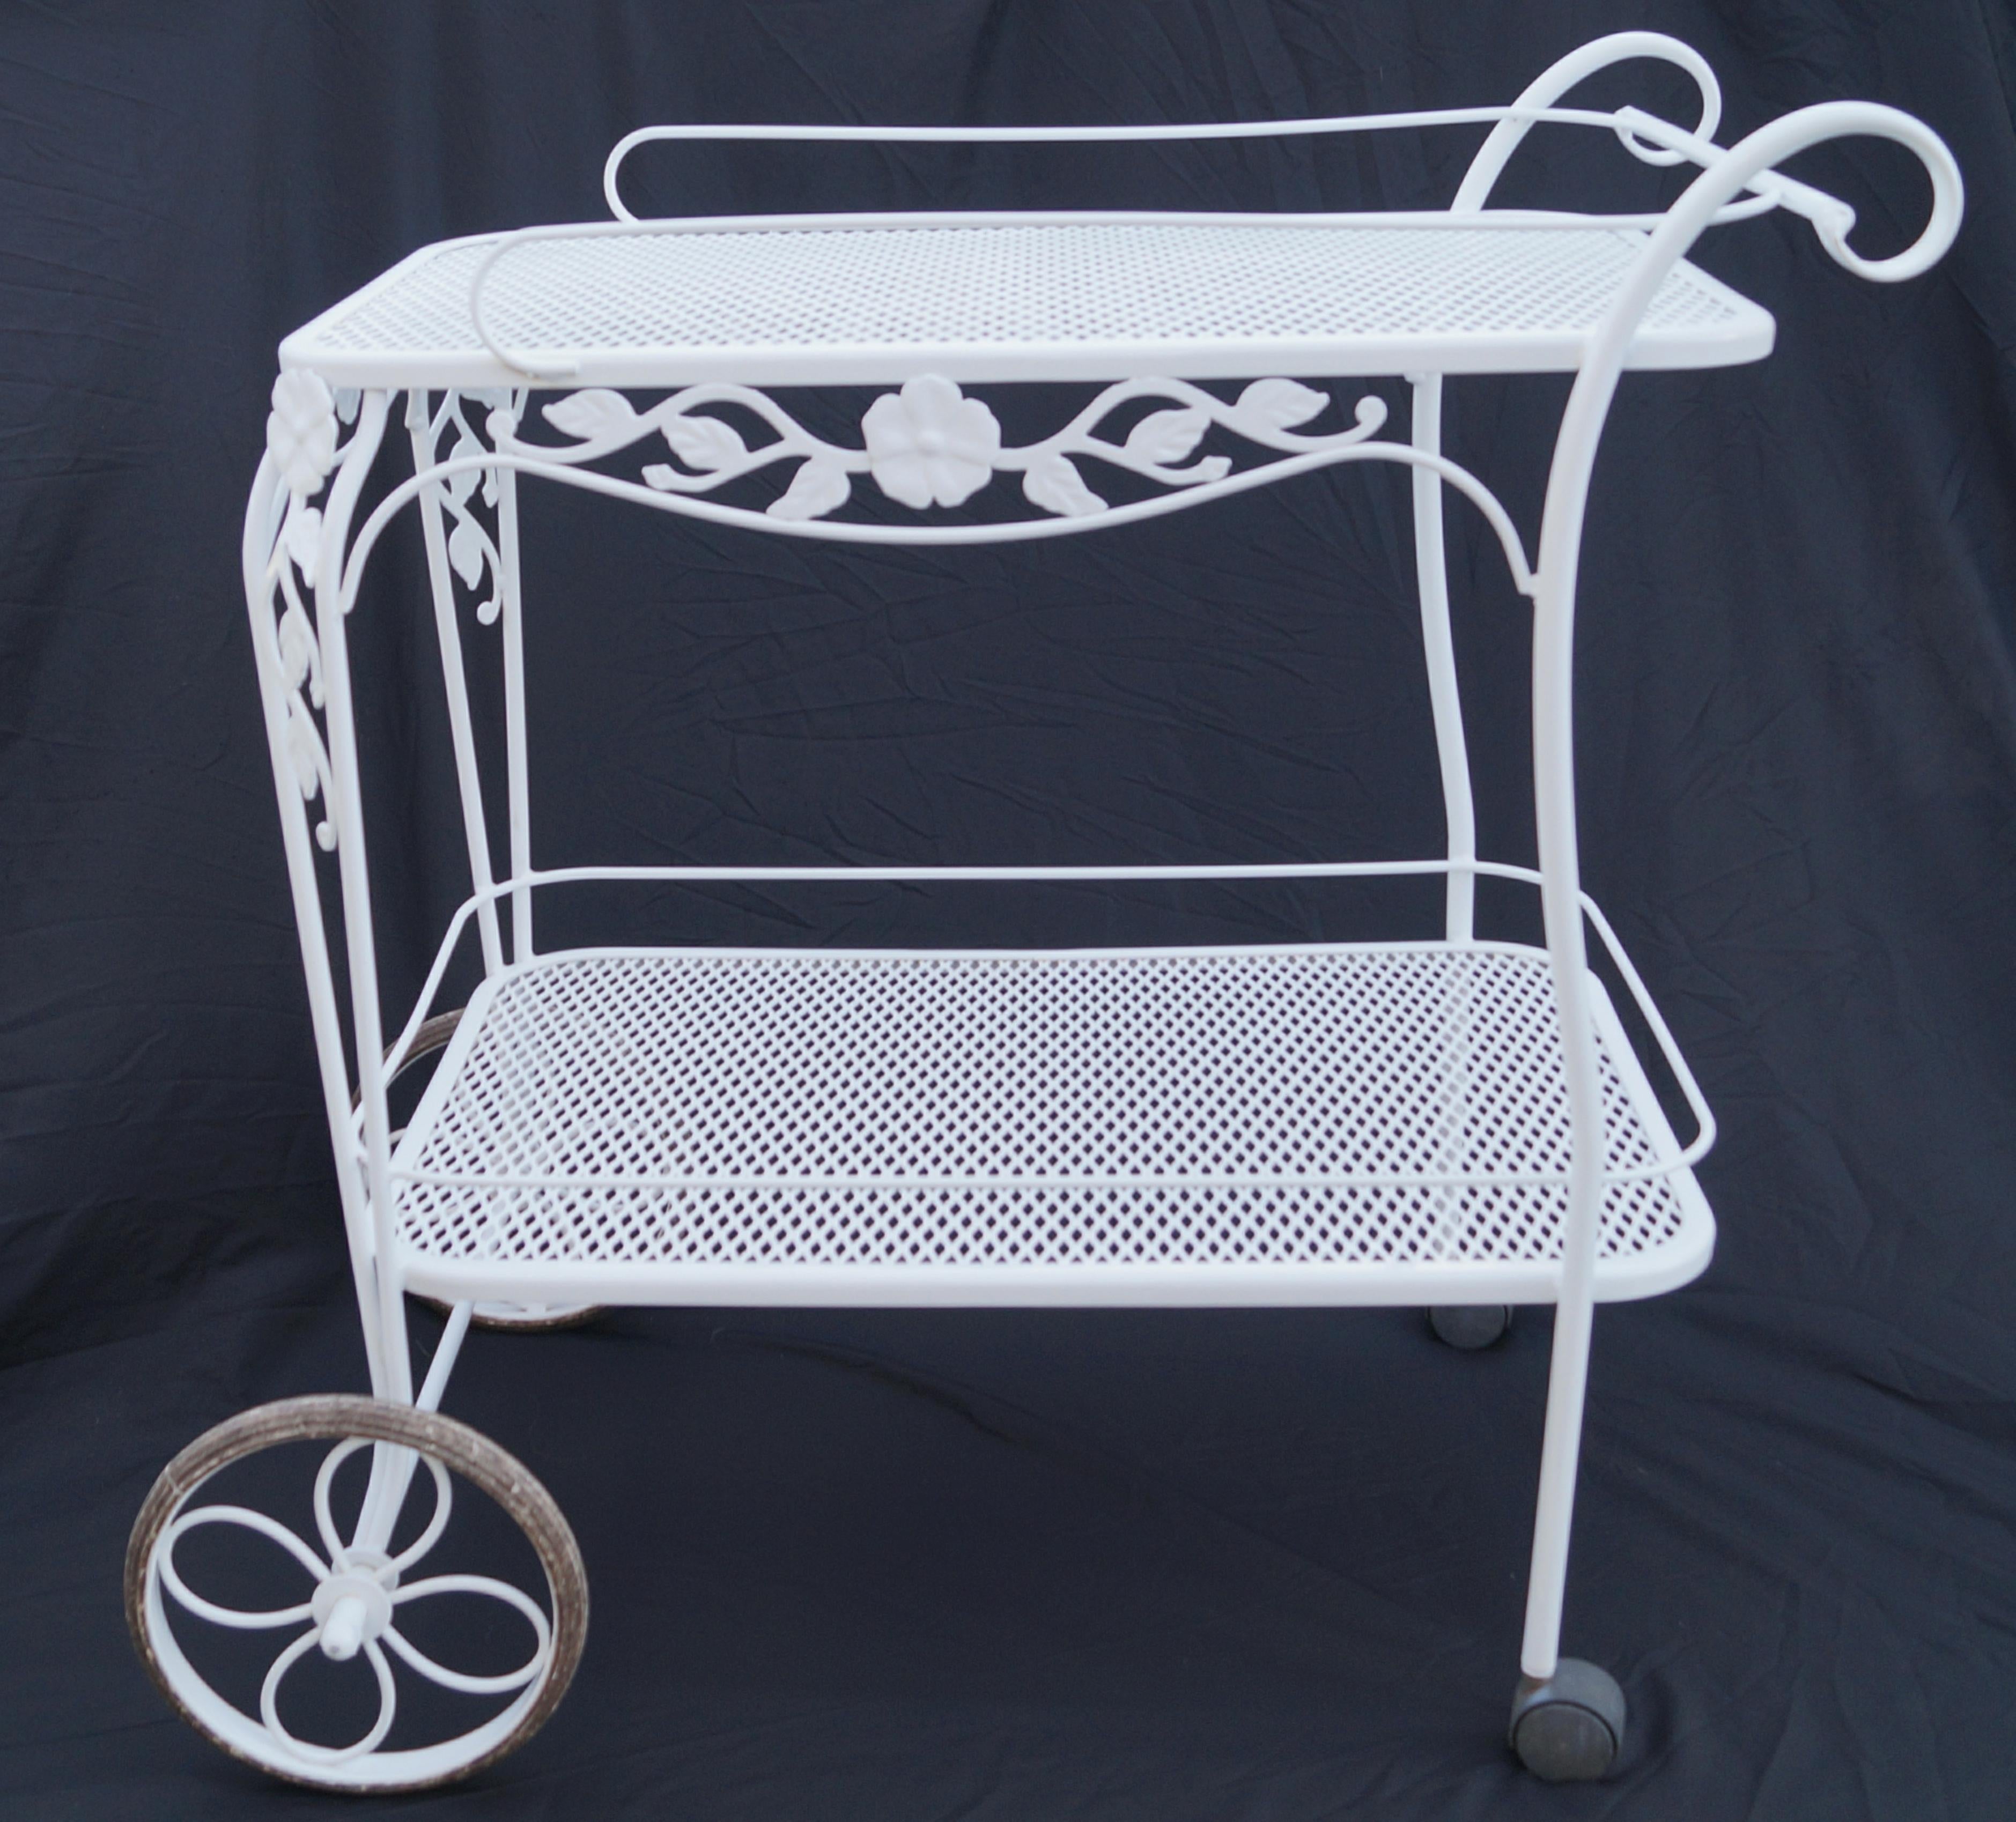 Vintage Russell Woodard Sculptura wrought iron  Bar Tea Service Cart .
If you are in the New Jersey, New York City Metro Area, please contact us with your delivery zipcode, as we may be able to deliver curbside for less than the calculated White